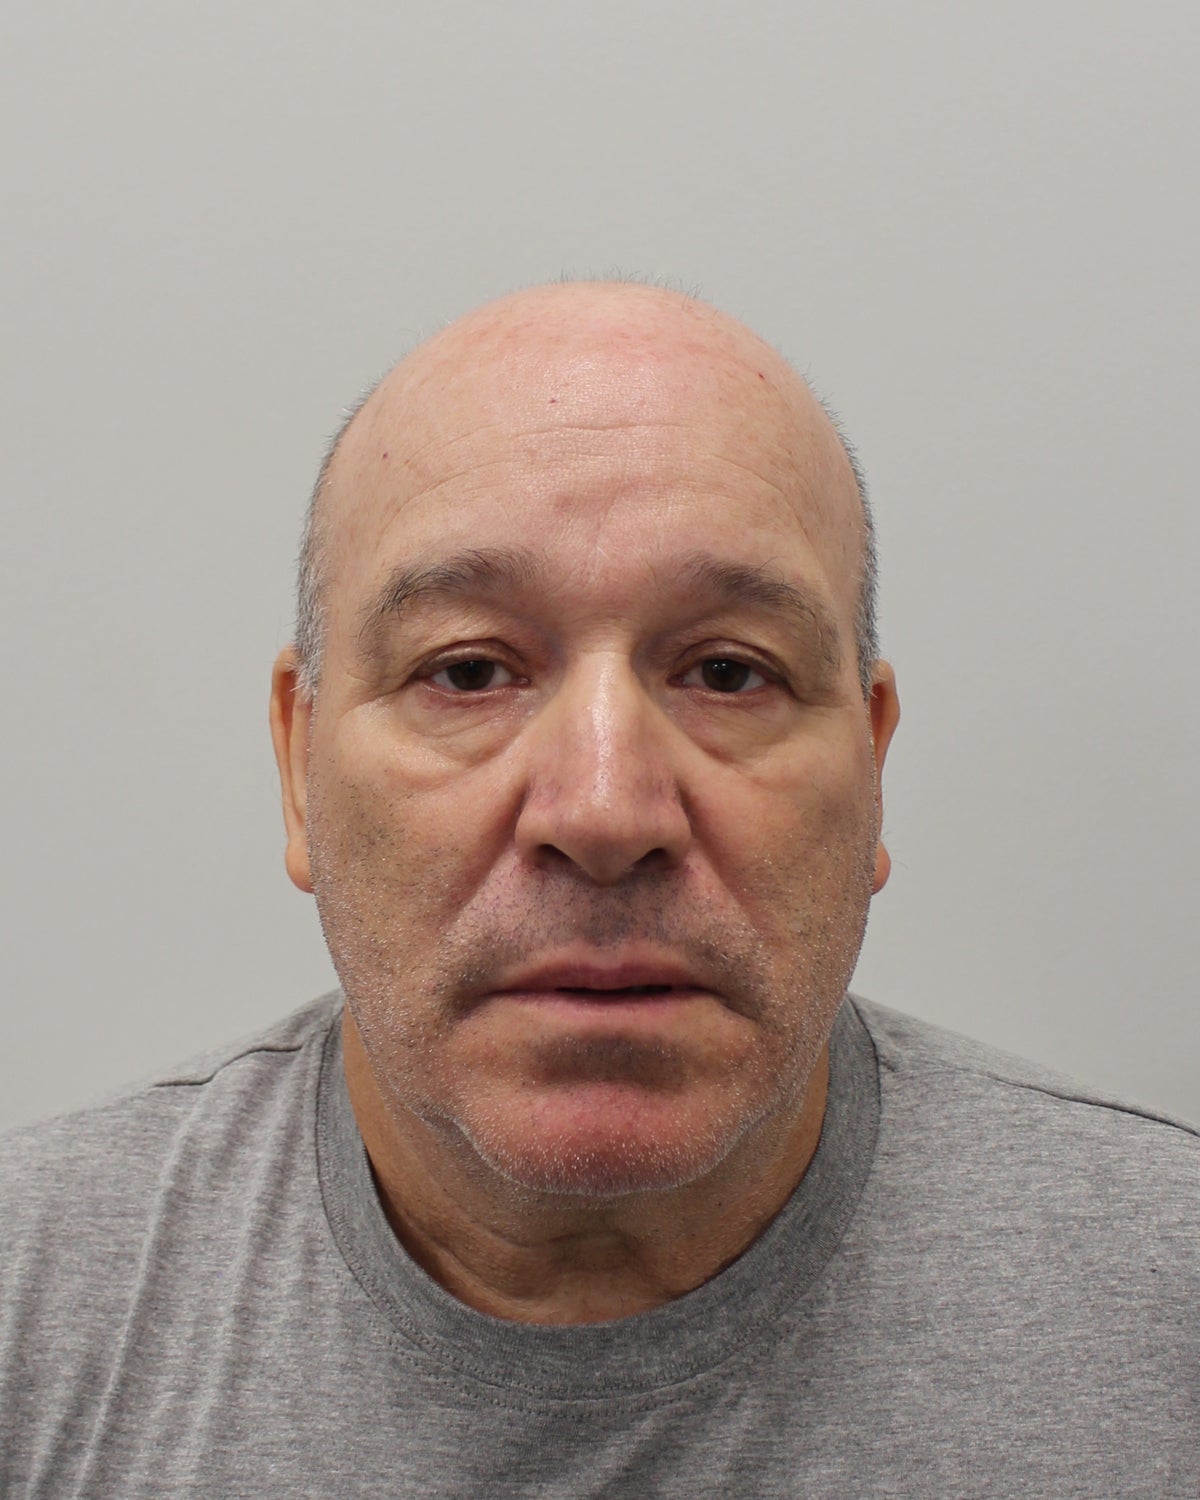 ‘Prolific offender’ who sexually assaulted girls as young as 12 on buses jailed